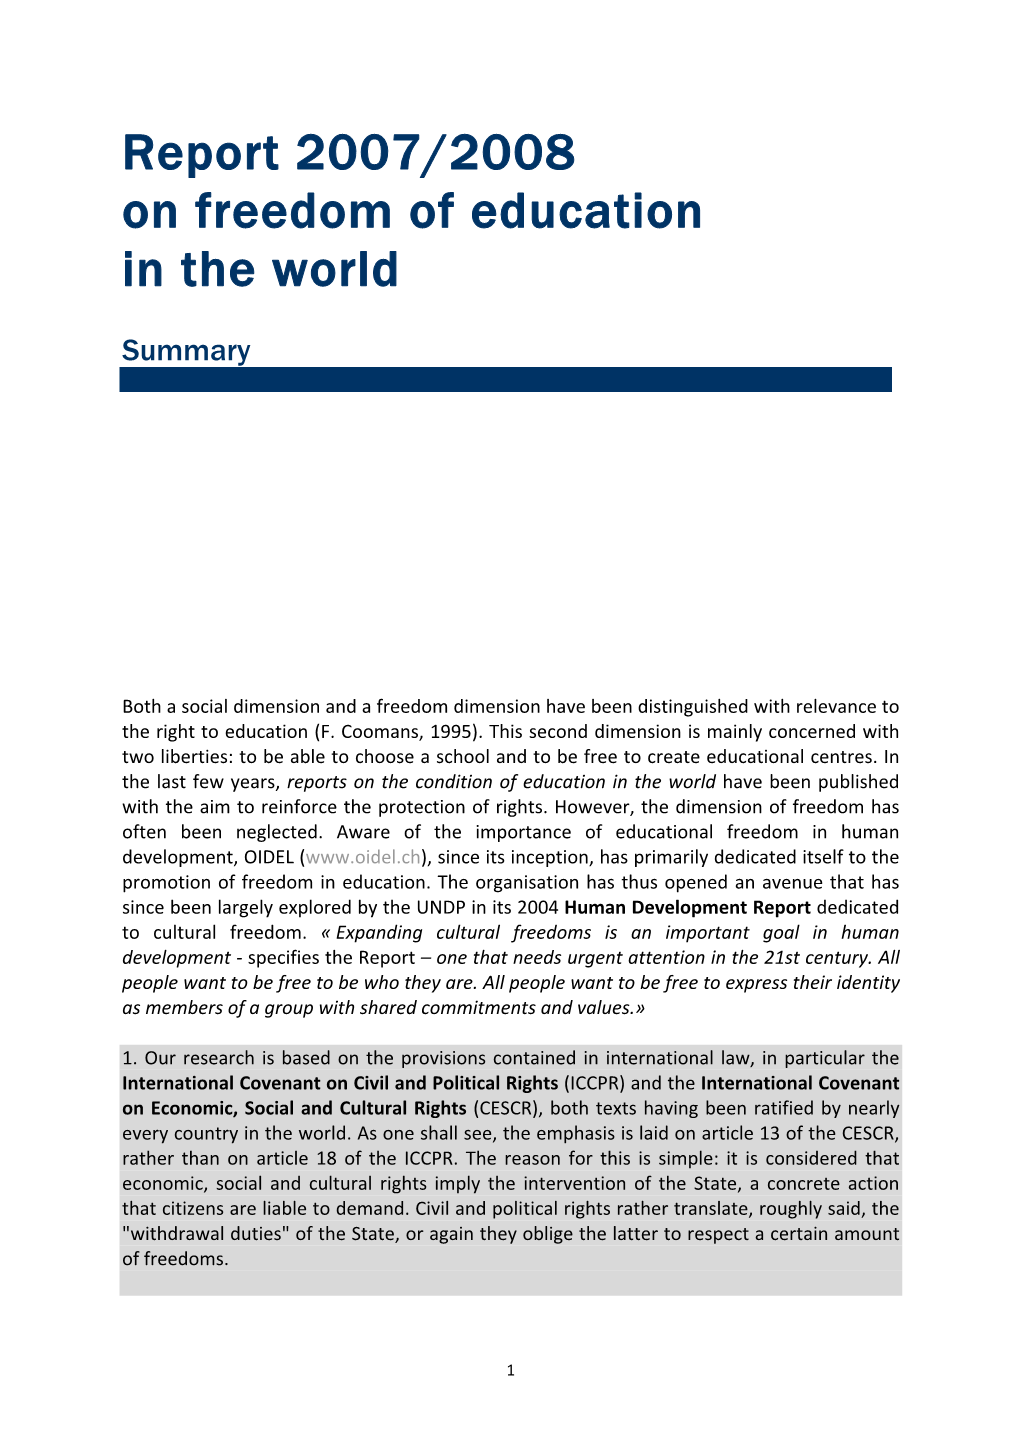 Report 2007/2008 on Freedom of Education in the World